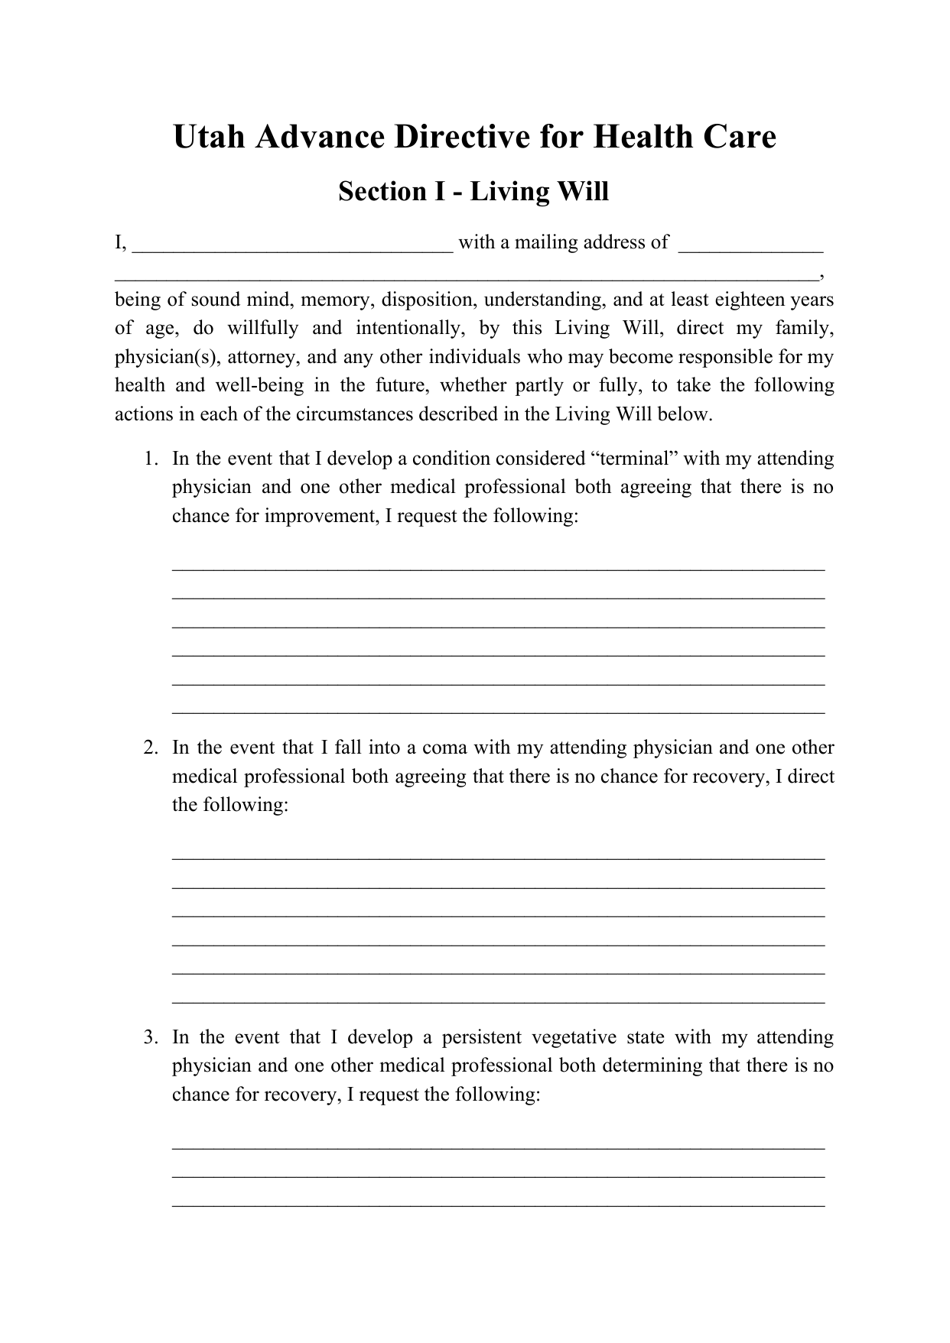 Advance Directive for Health Care Form - Utah, Page 1